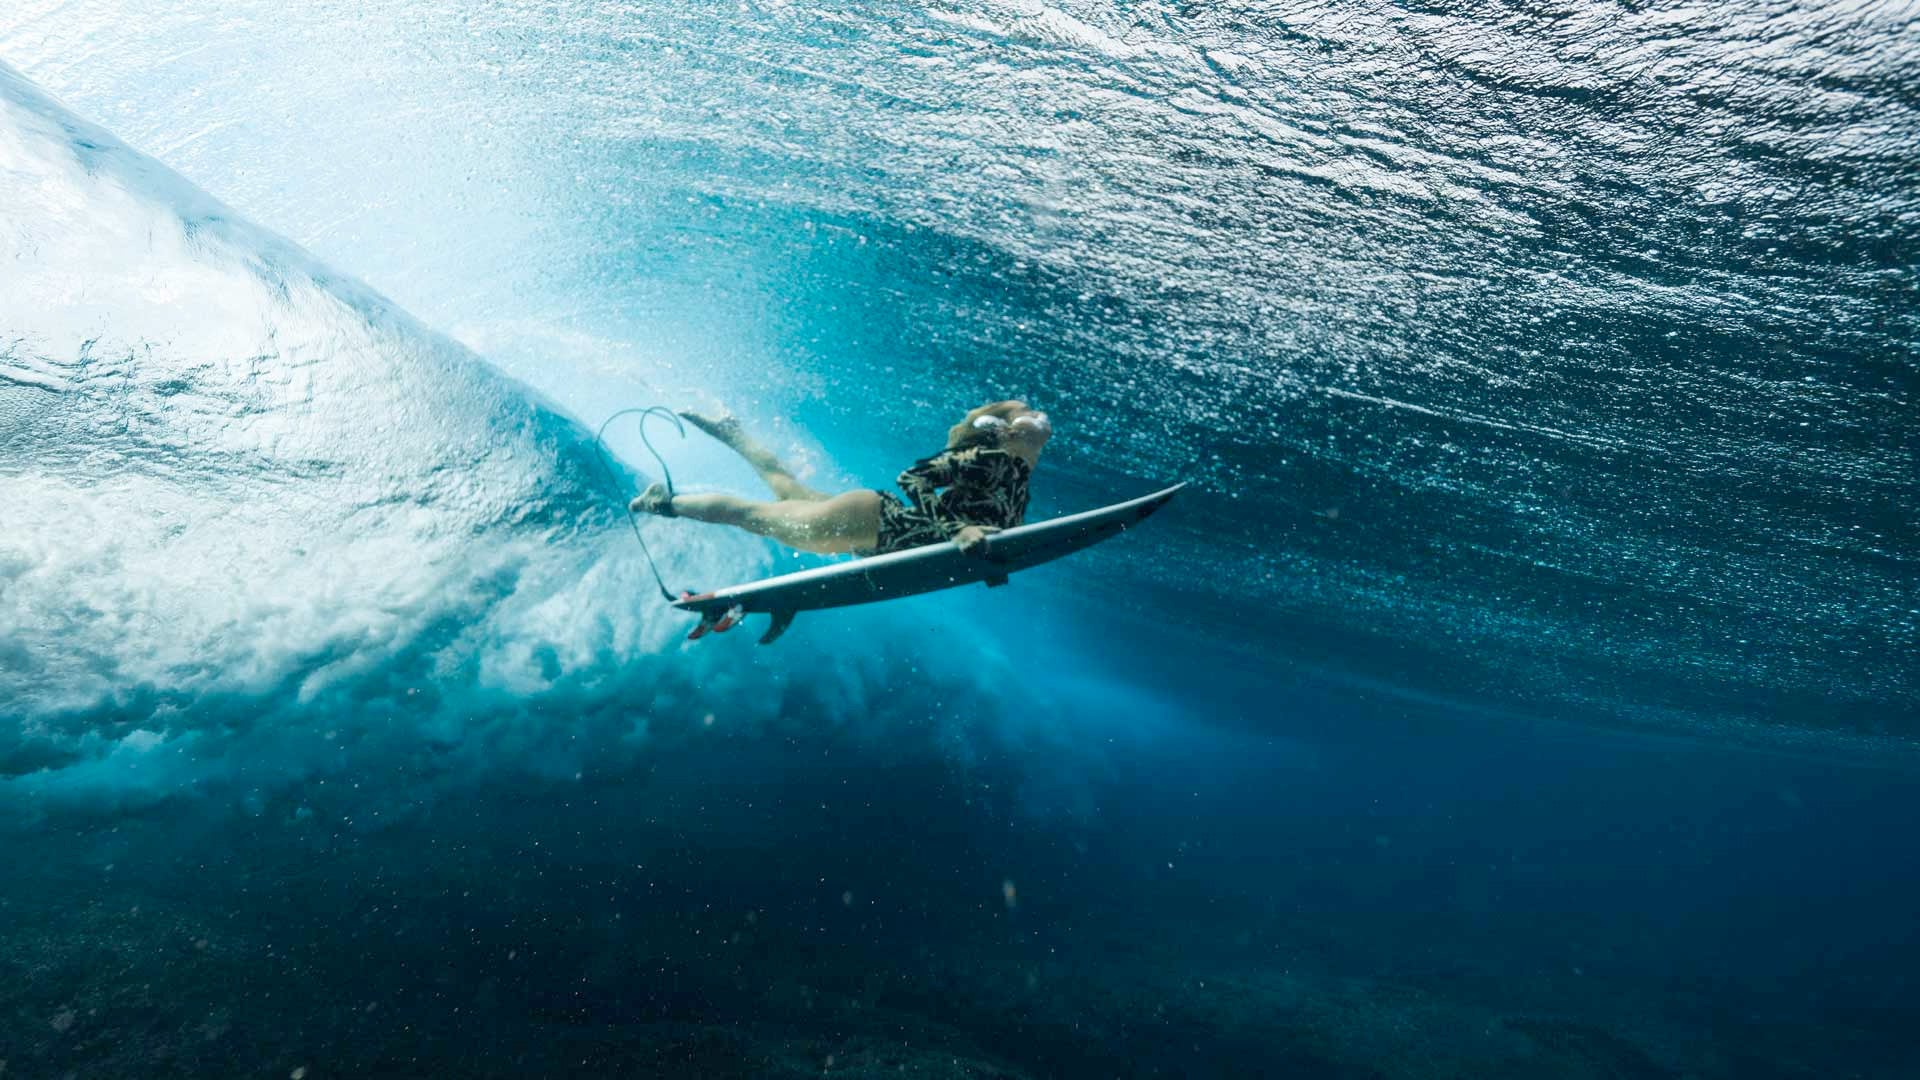 Time To Face Your Surfing Fears?